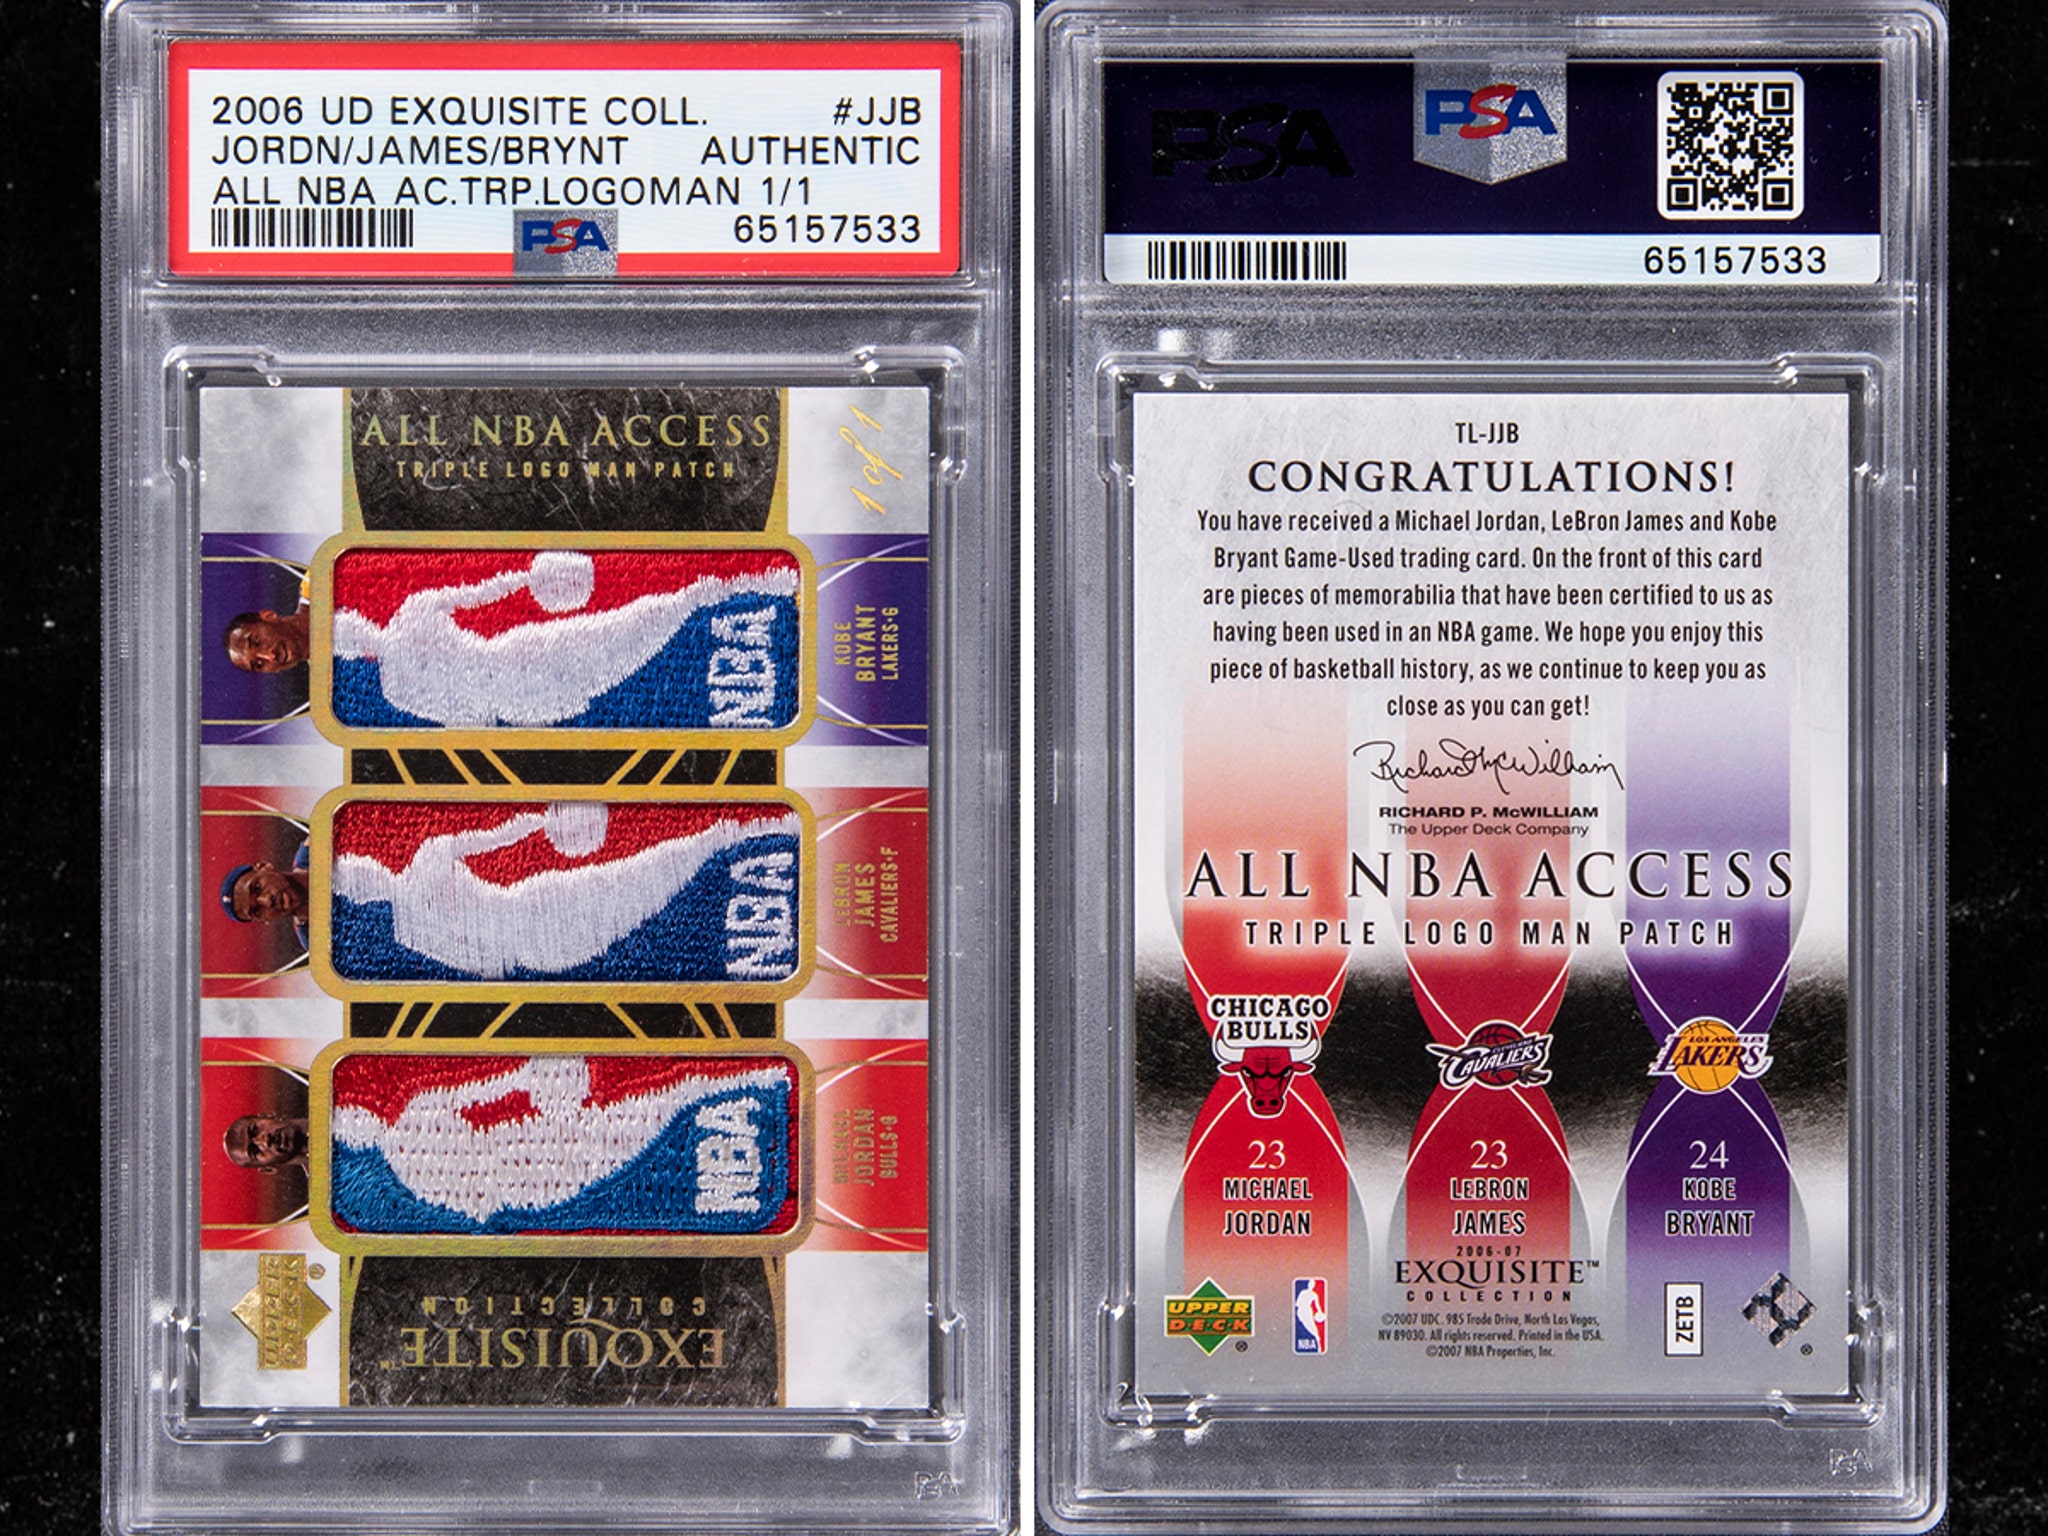 LeBron, Kobe, MJ Triple Logoman Card Hits Auction, Could Sell For 